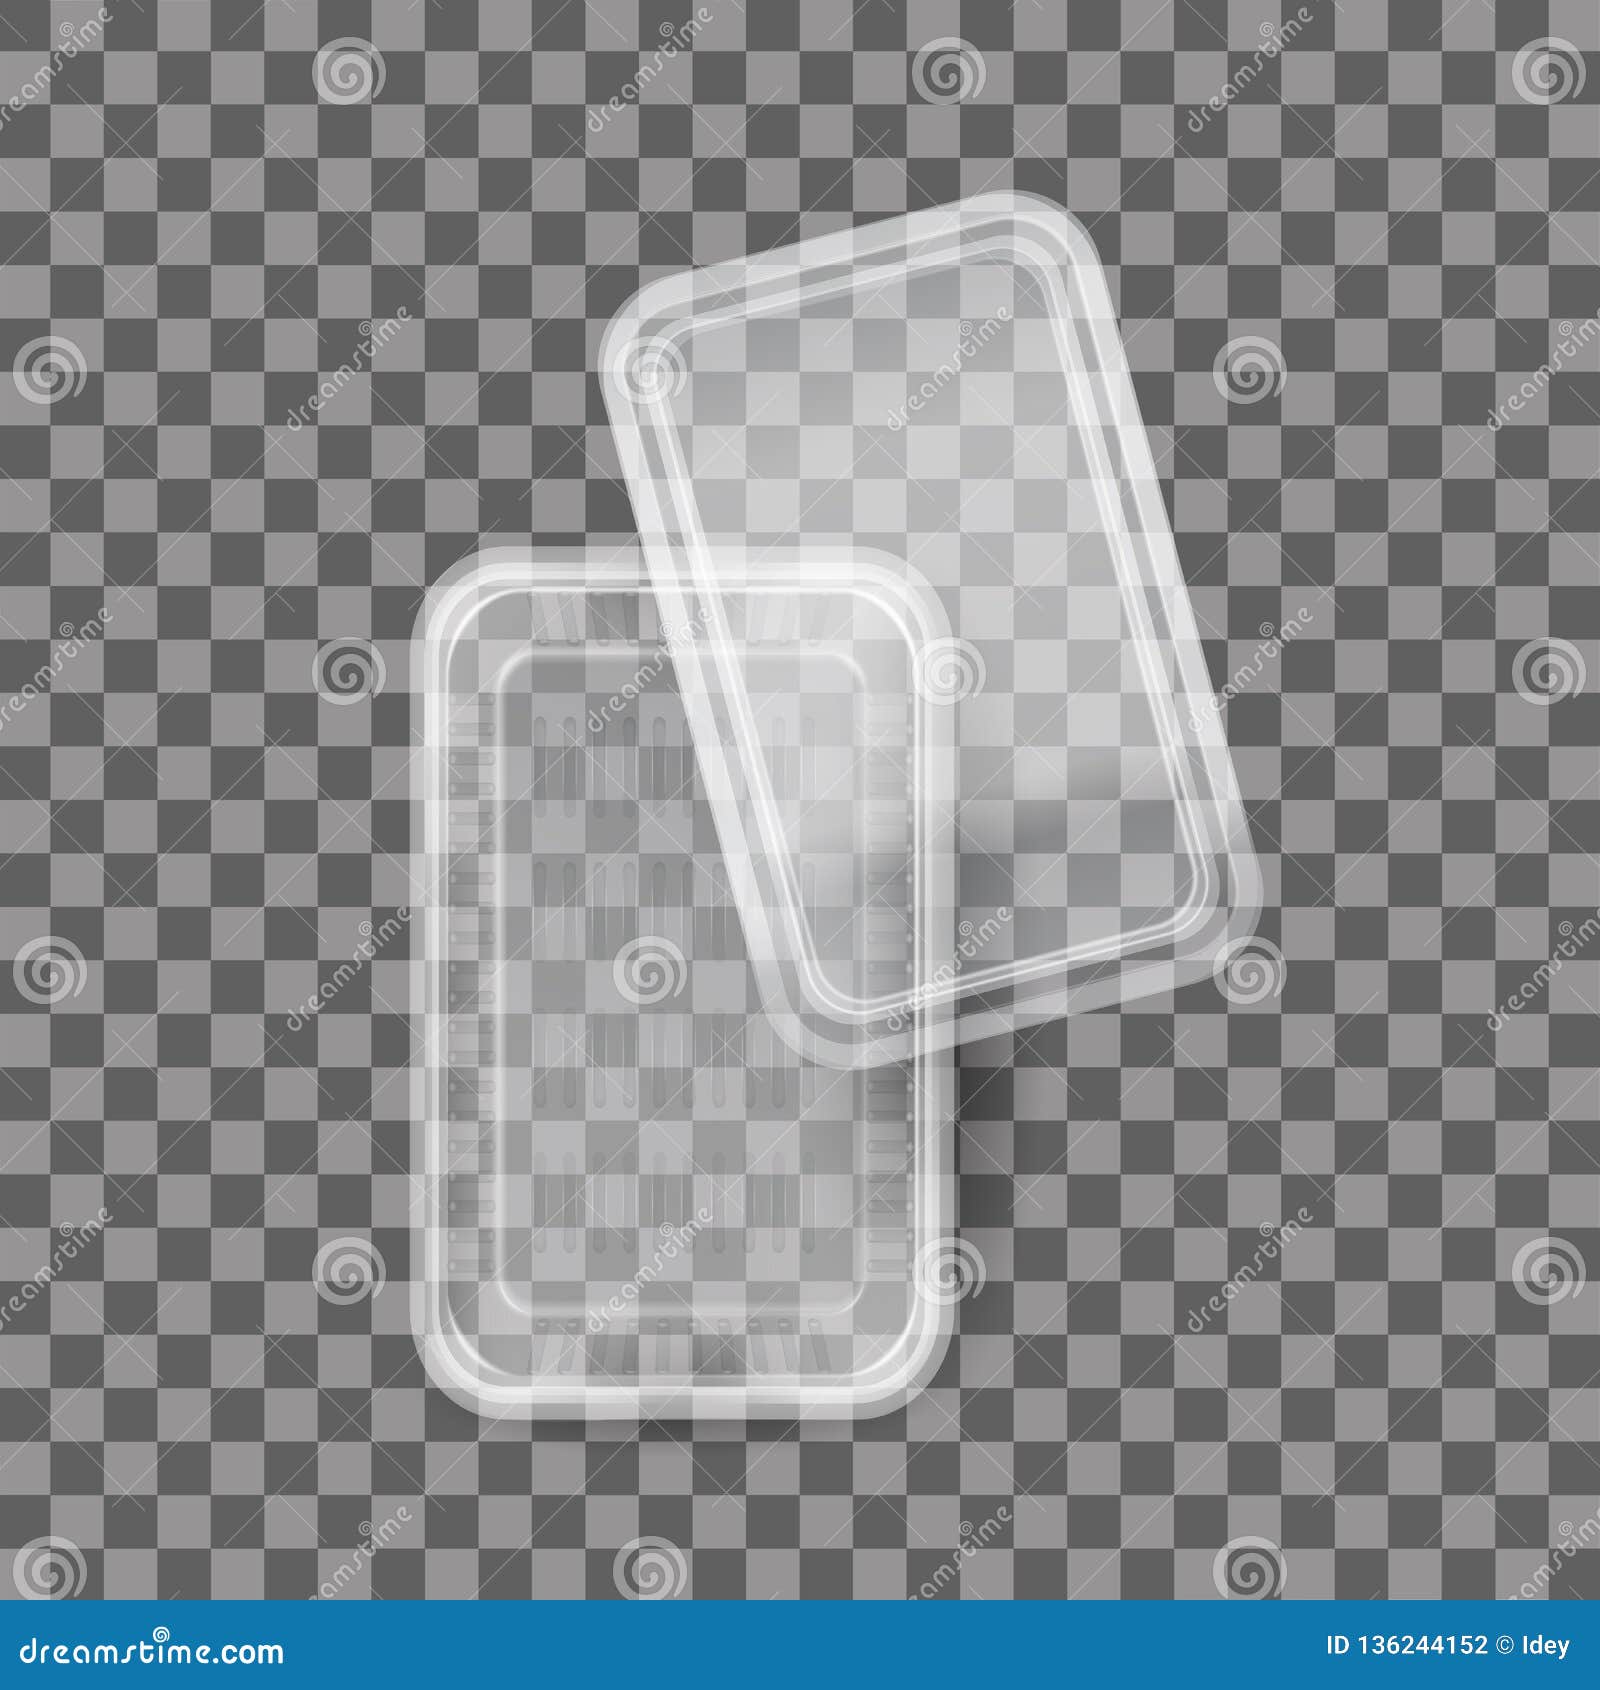 Download Realistic Mock Up Transparent Plastic Food Container Packaging For Food Stock Vector Illustration Of Layout Container 136244152